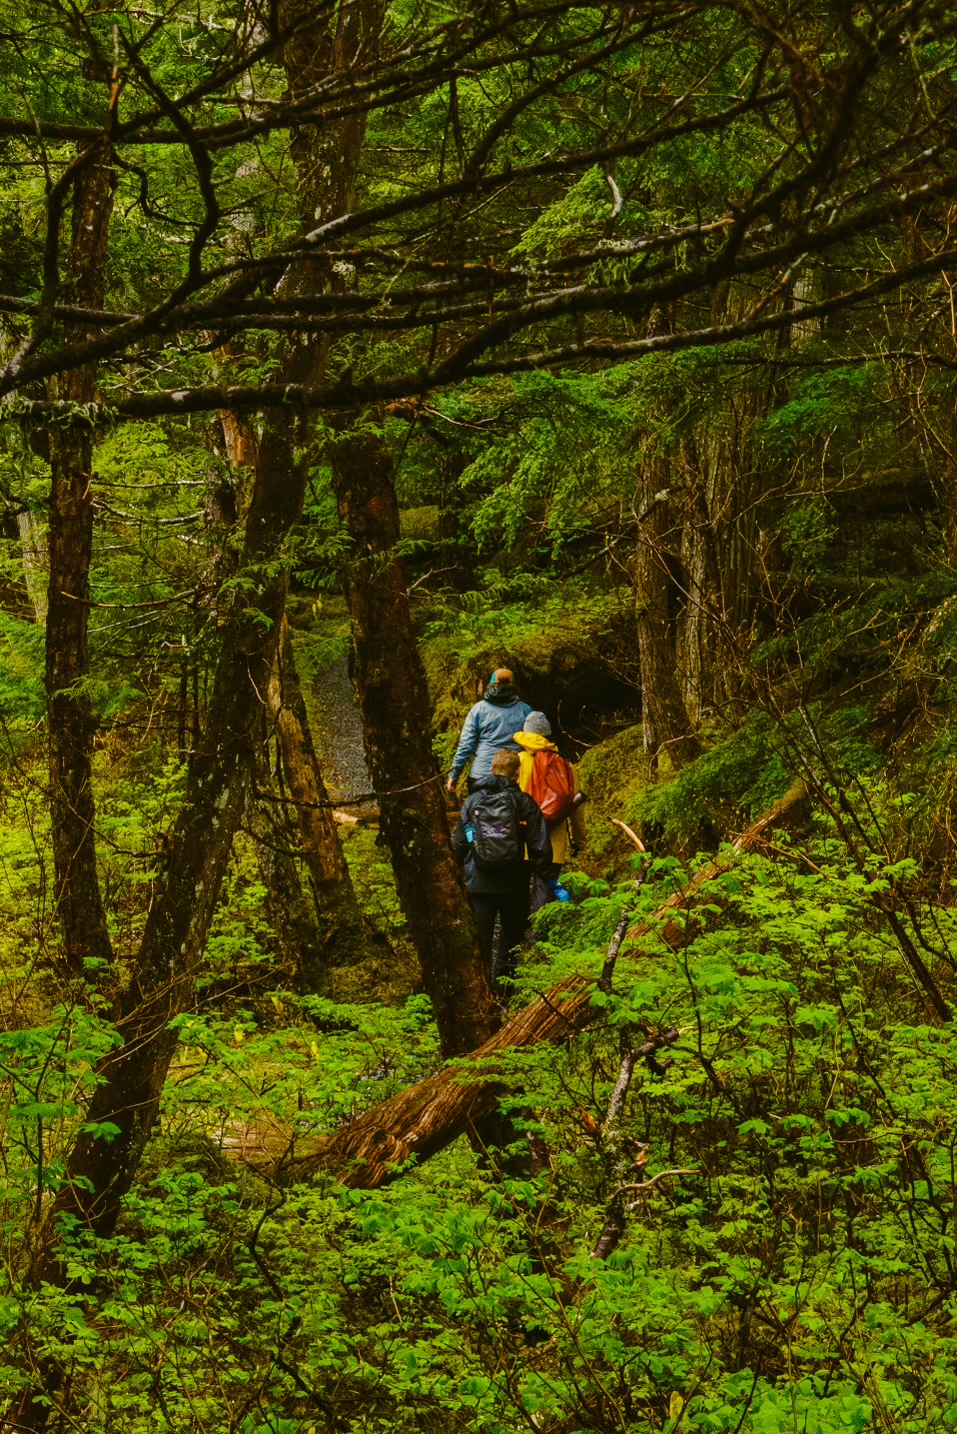 Hikers walk through the 'hanging valley' that is featured in this trail.